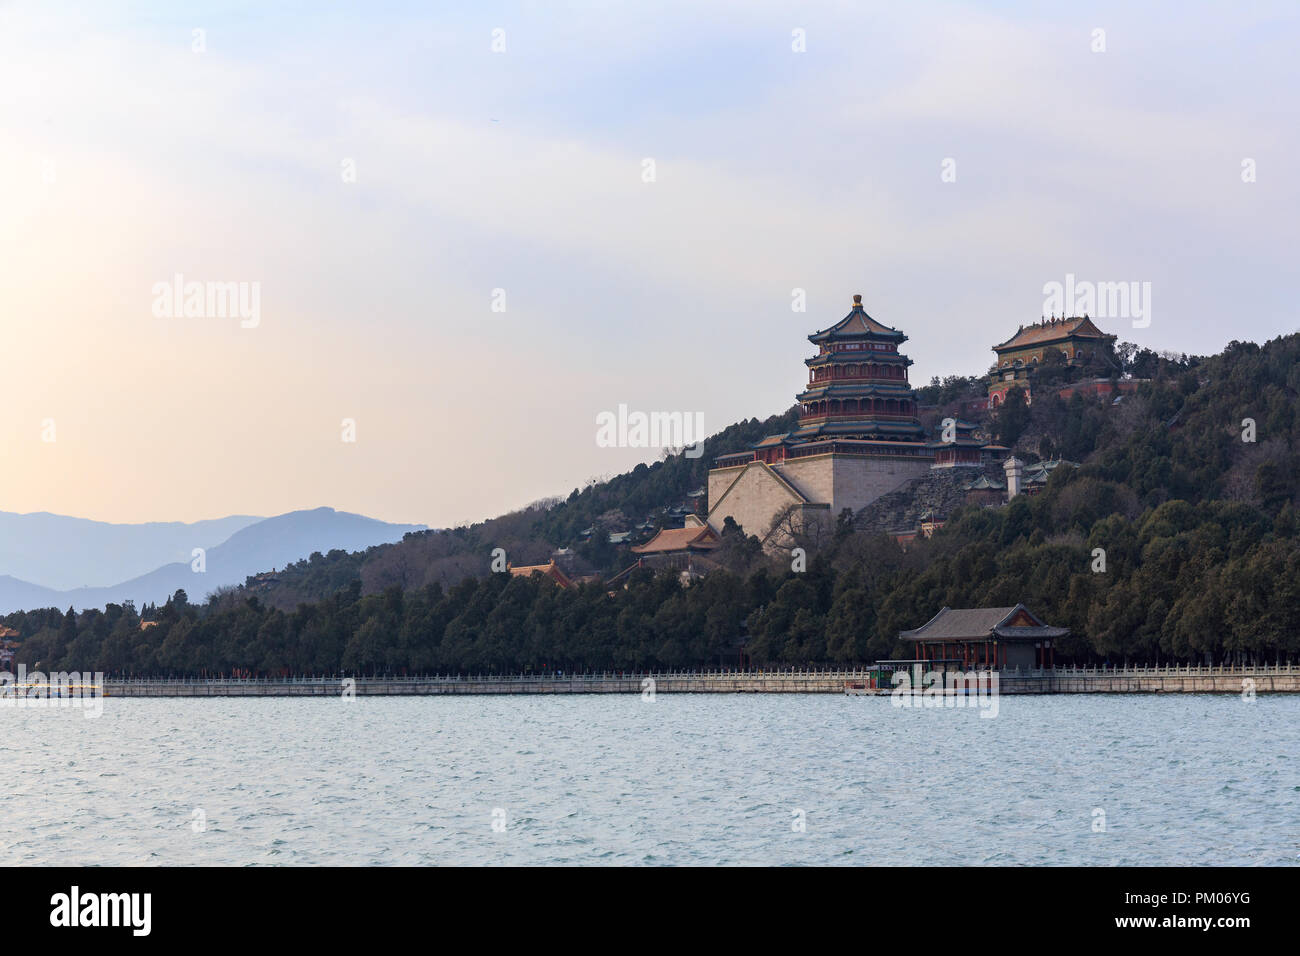 Tower of Buddhist Fragrances in the hills at the Summer Palace, Beijing, China. Stock Photo